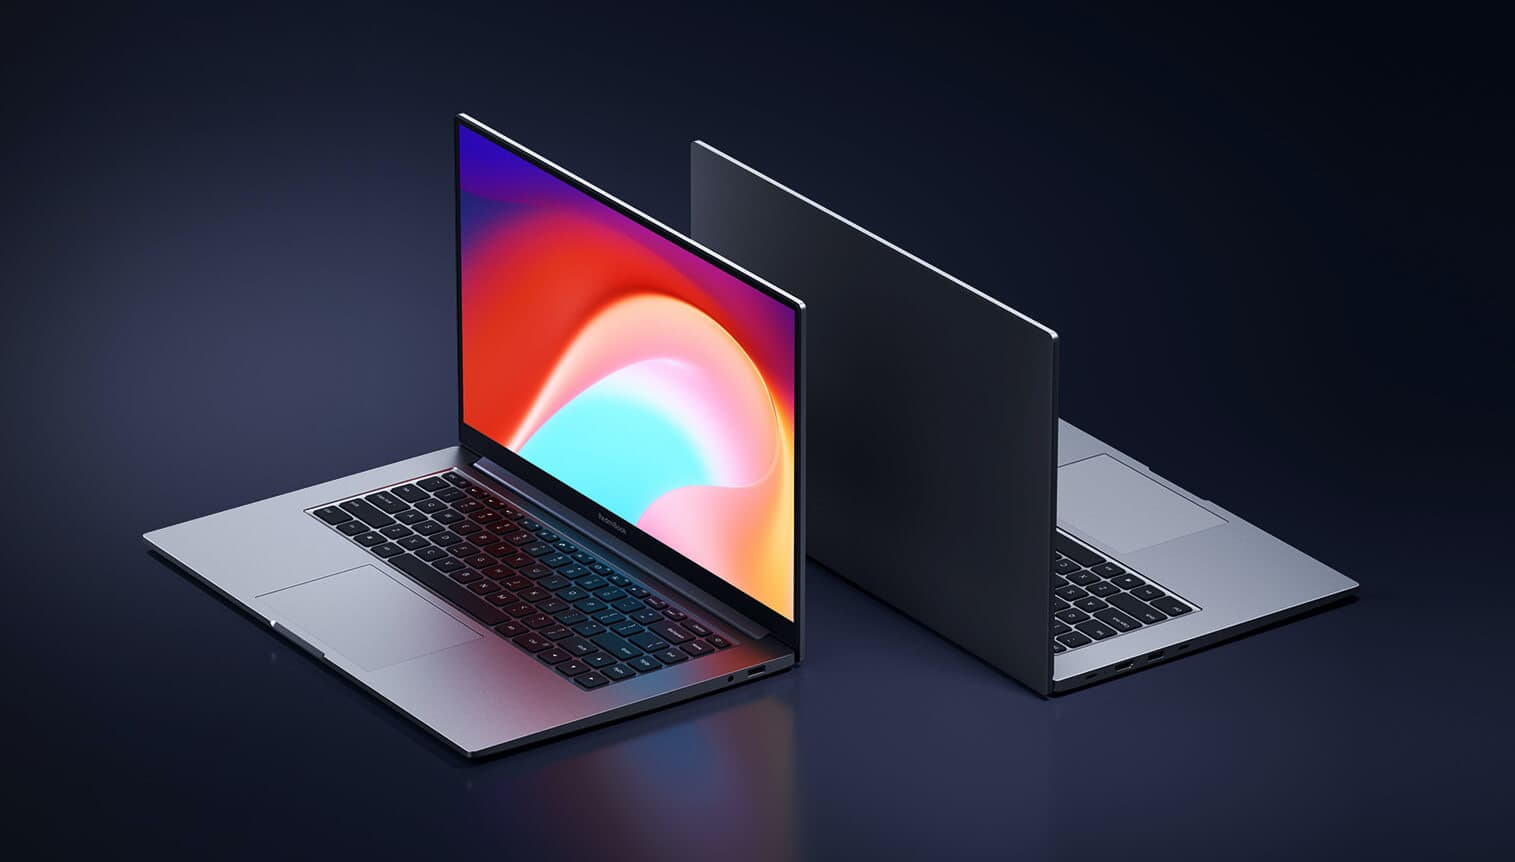 MI Laptops launching in India soon,teased by Xiaomi